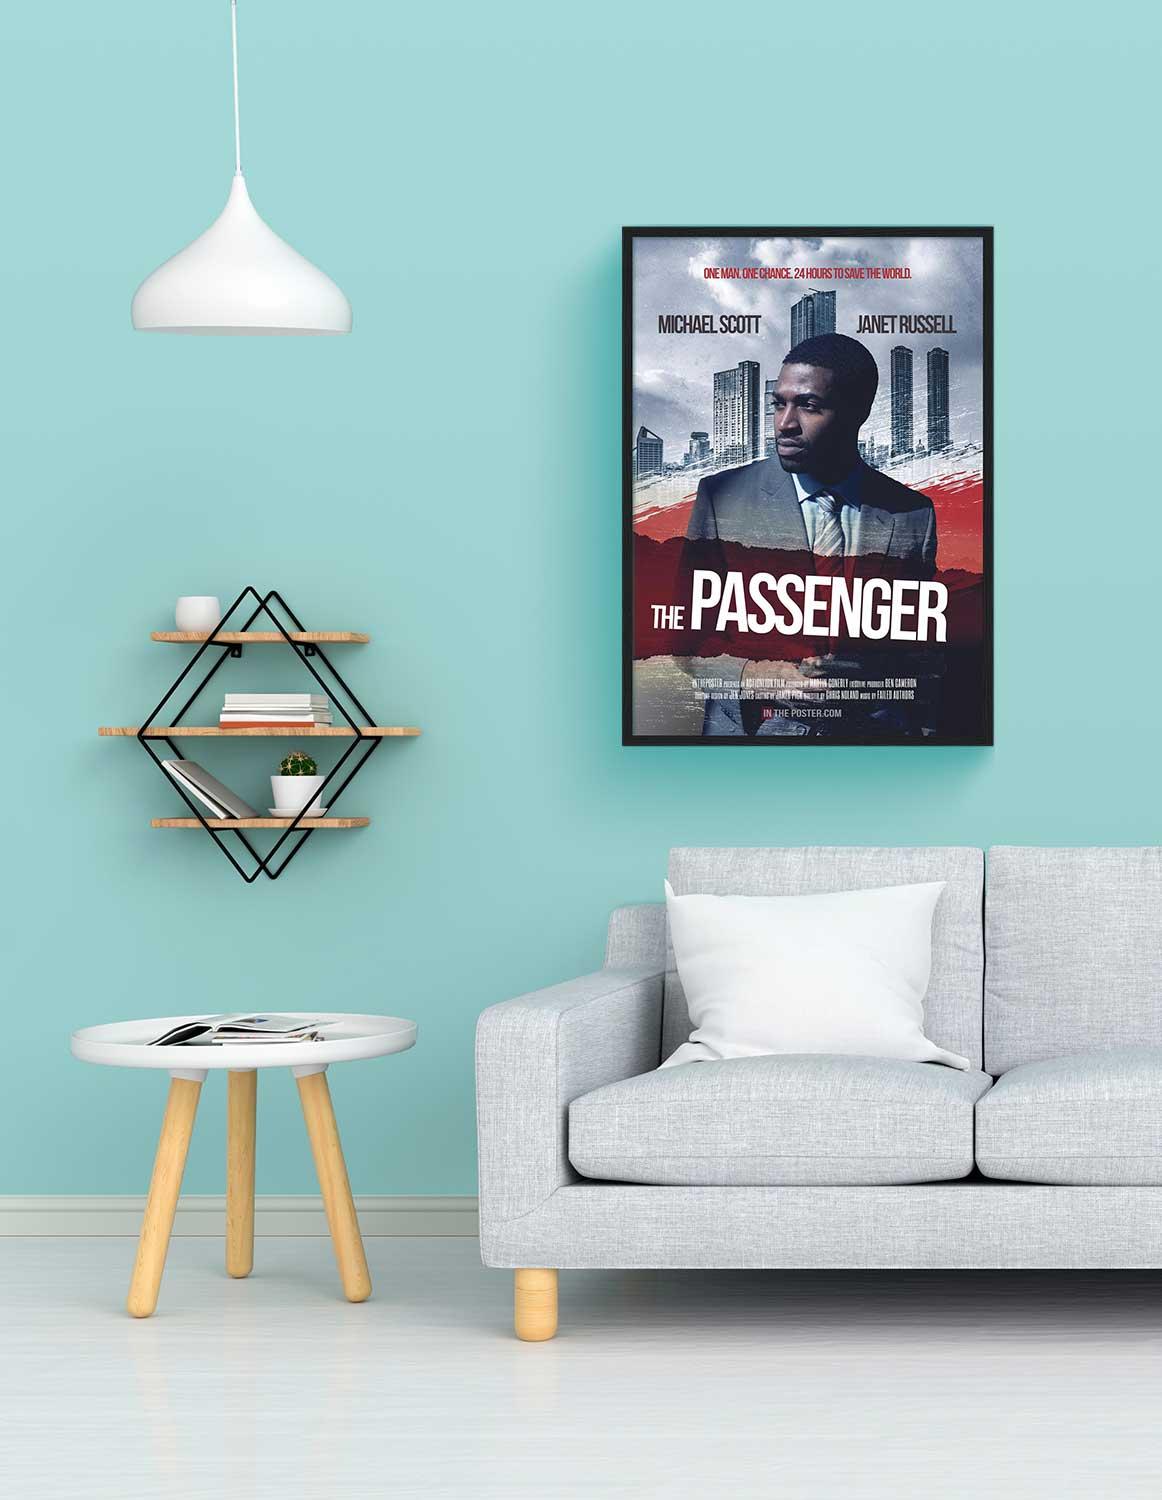 The thiller movie poster in a black frame on a blue wall above a sofa